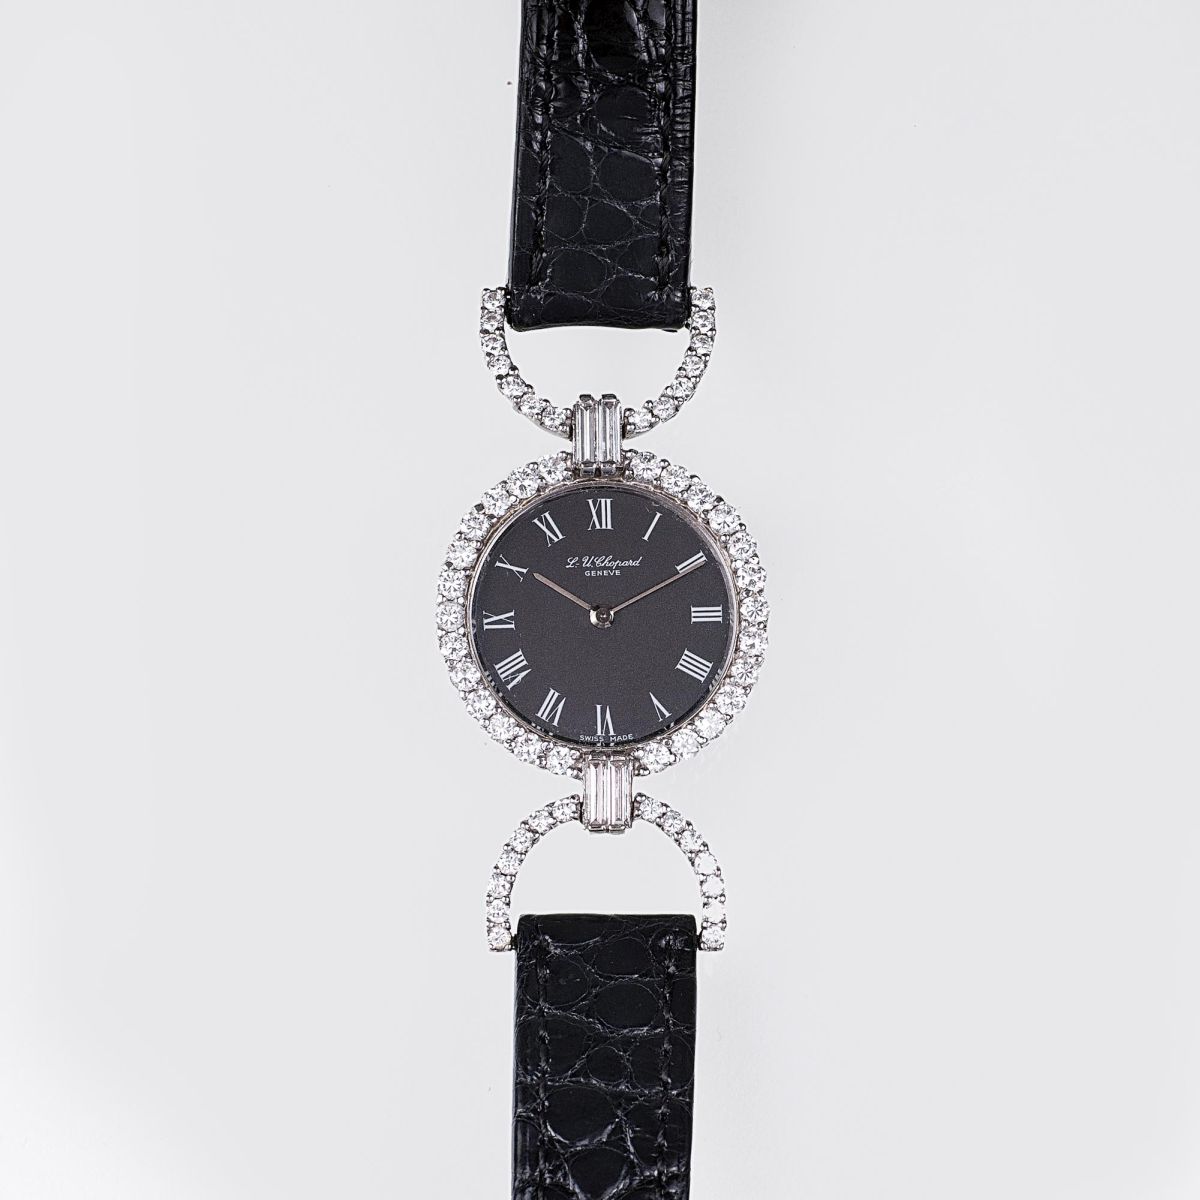 A Ladies' Watch with Diamonds